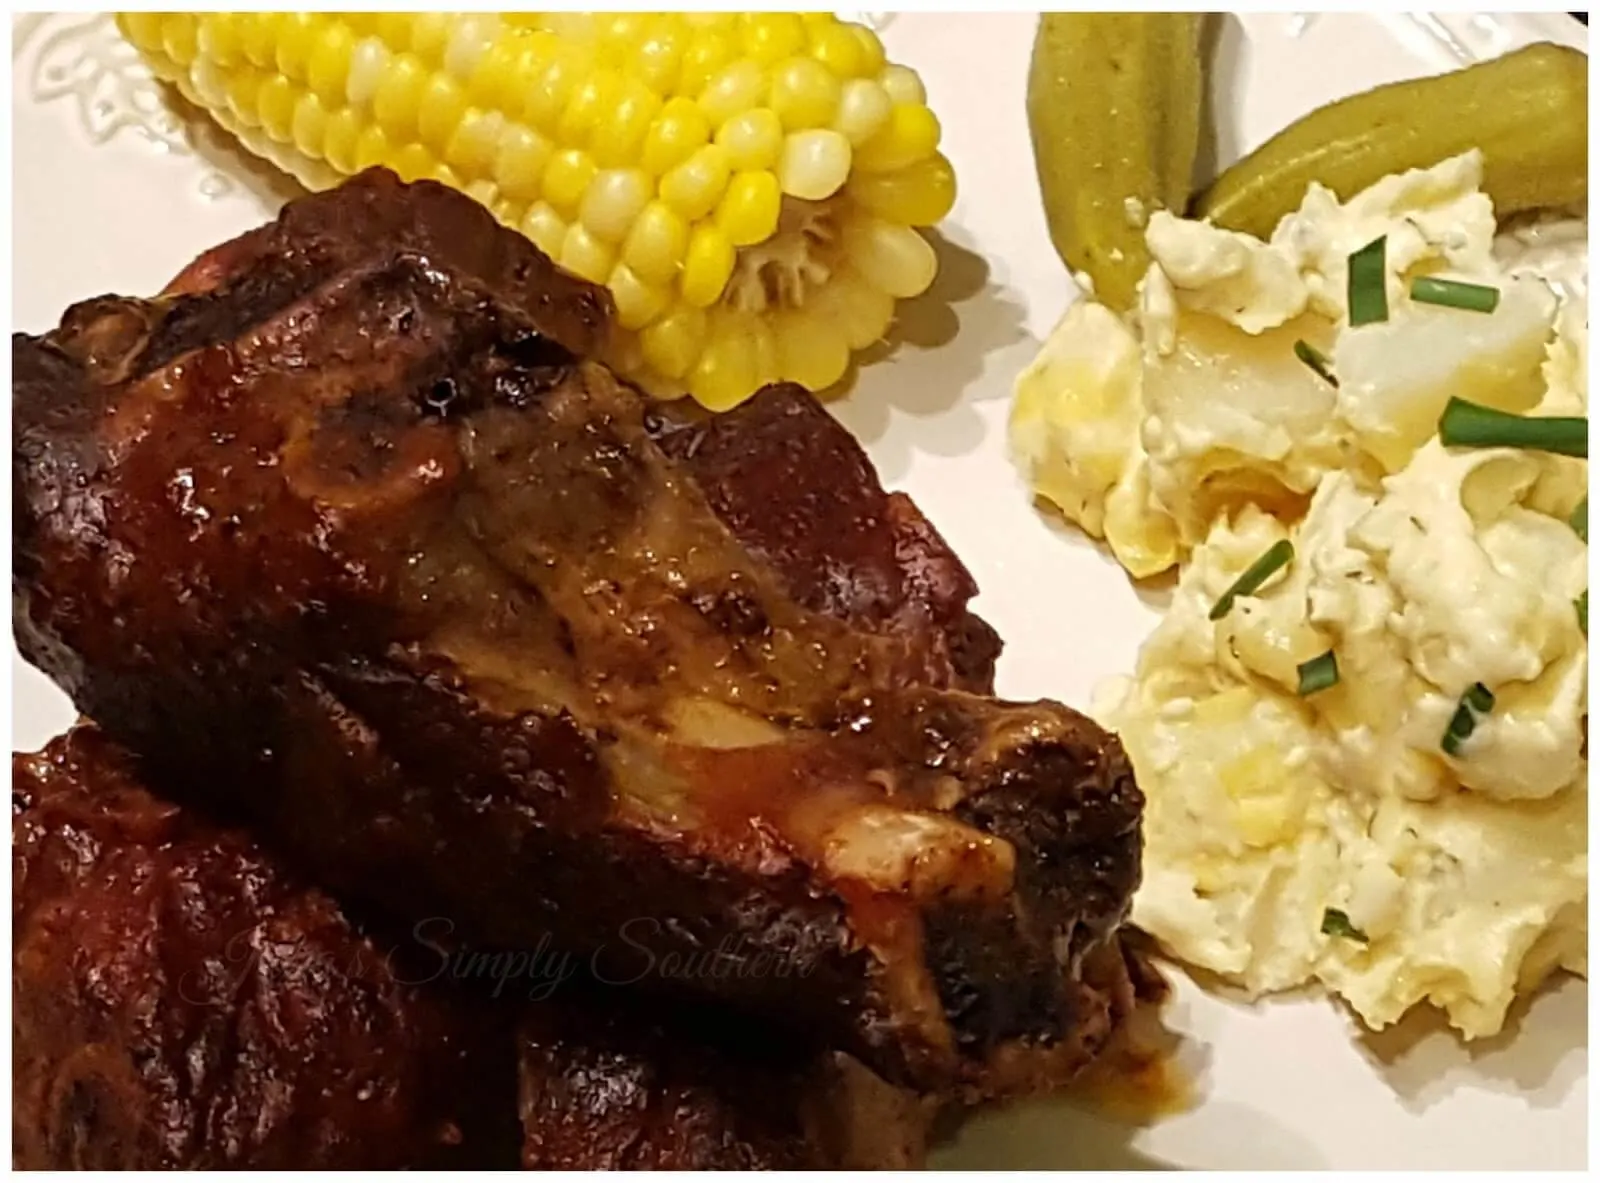 Beef ribs with corn on the cob, potato salad and pickled okra